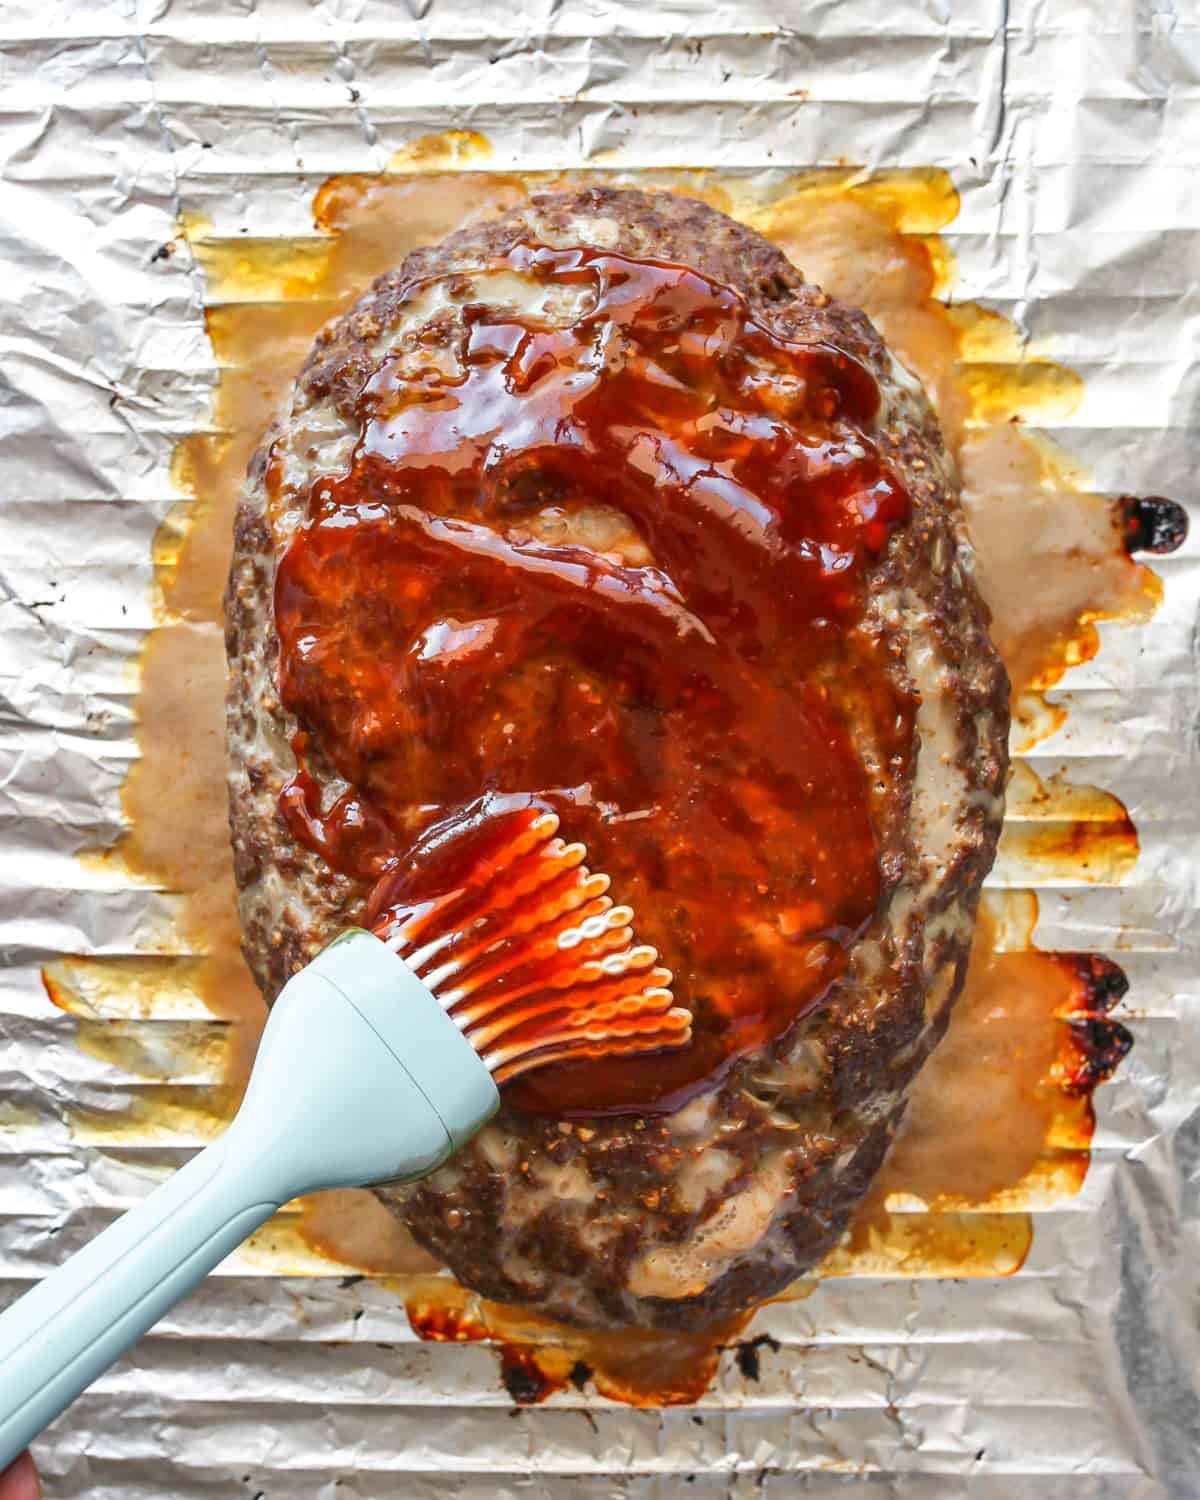 How to Make Meatloaf - brushing glaze on top of partially baked meatloaf with a pastry brush